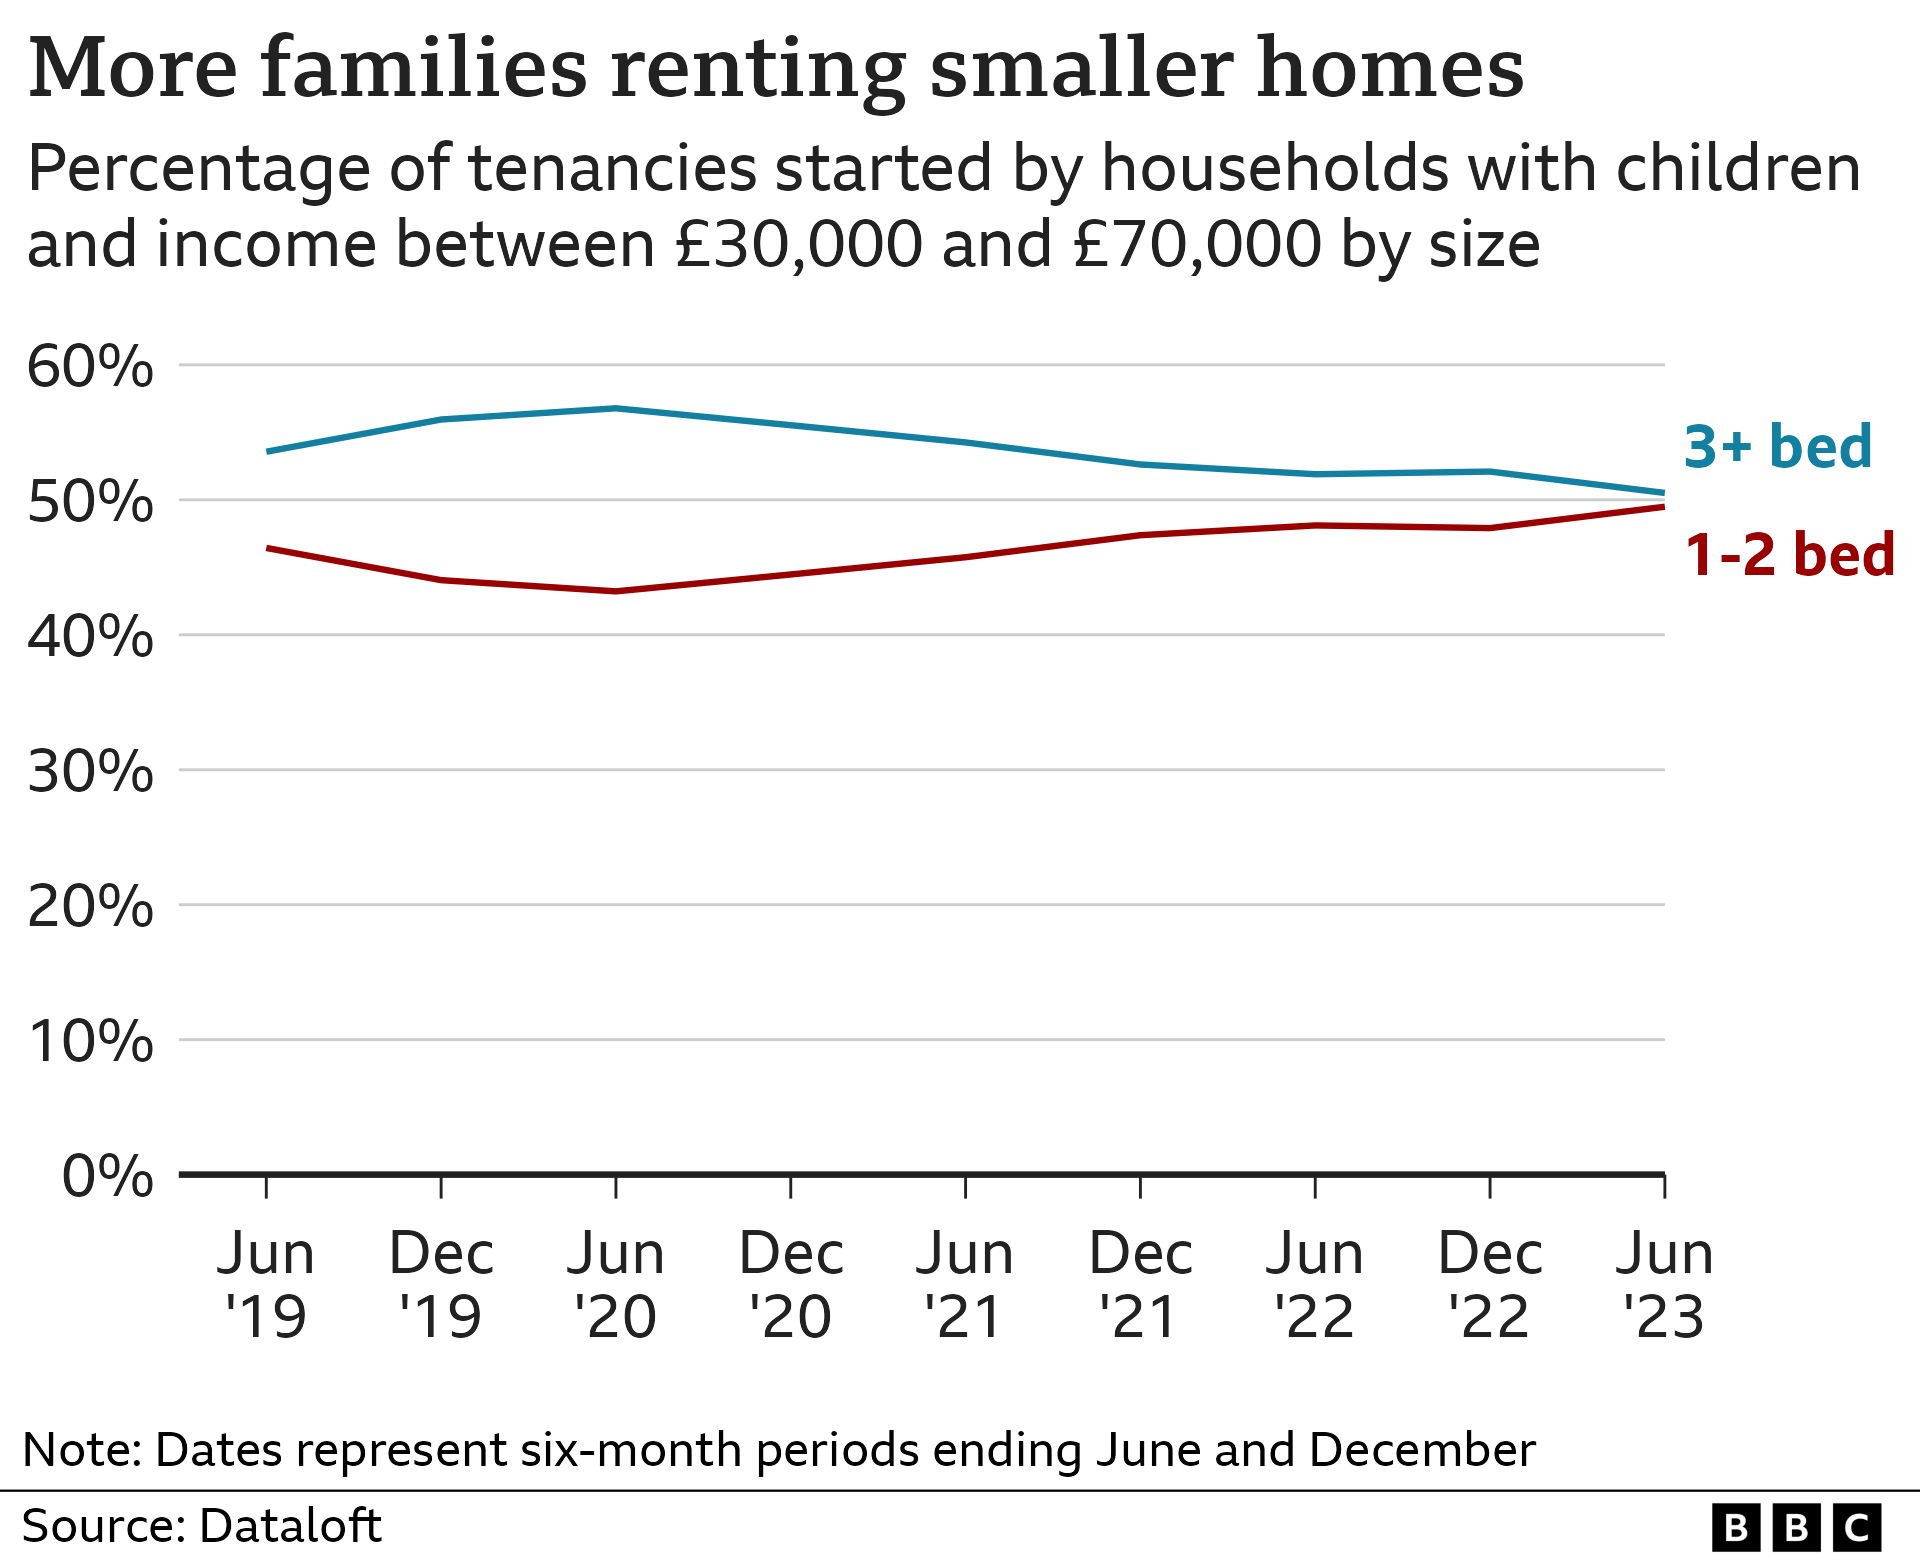 Line chart showing the percentage of families renting 3+ bed homes has fallen from 57% in the first half of 2020 to 51% in the first half of 2023